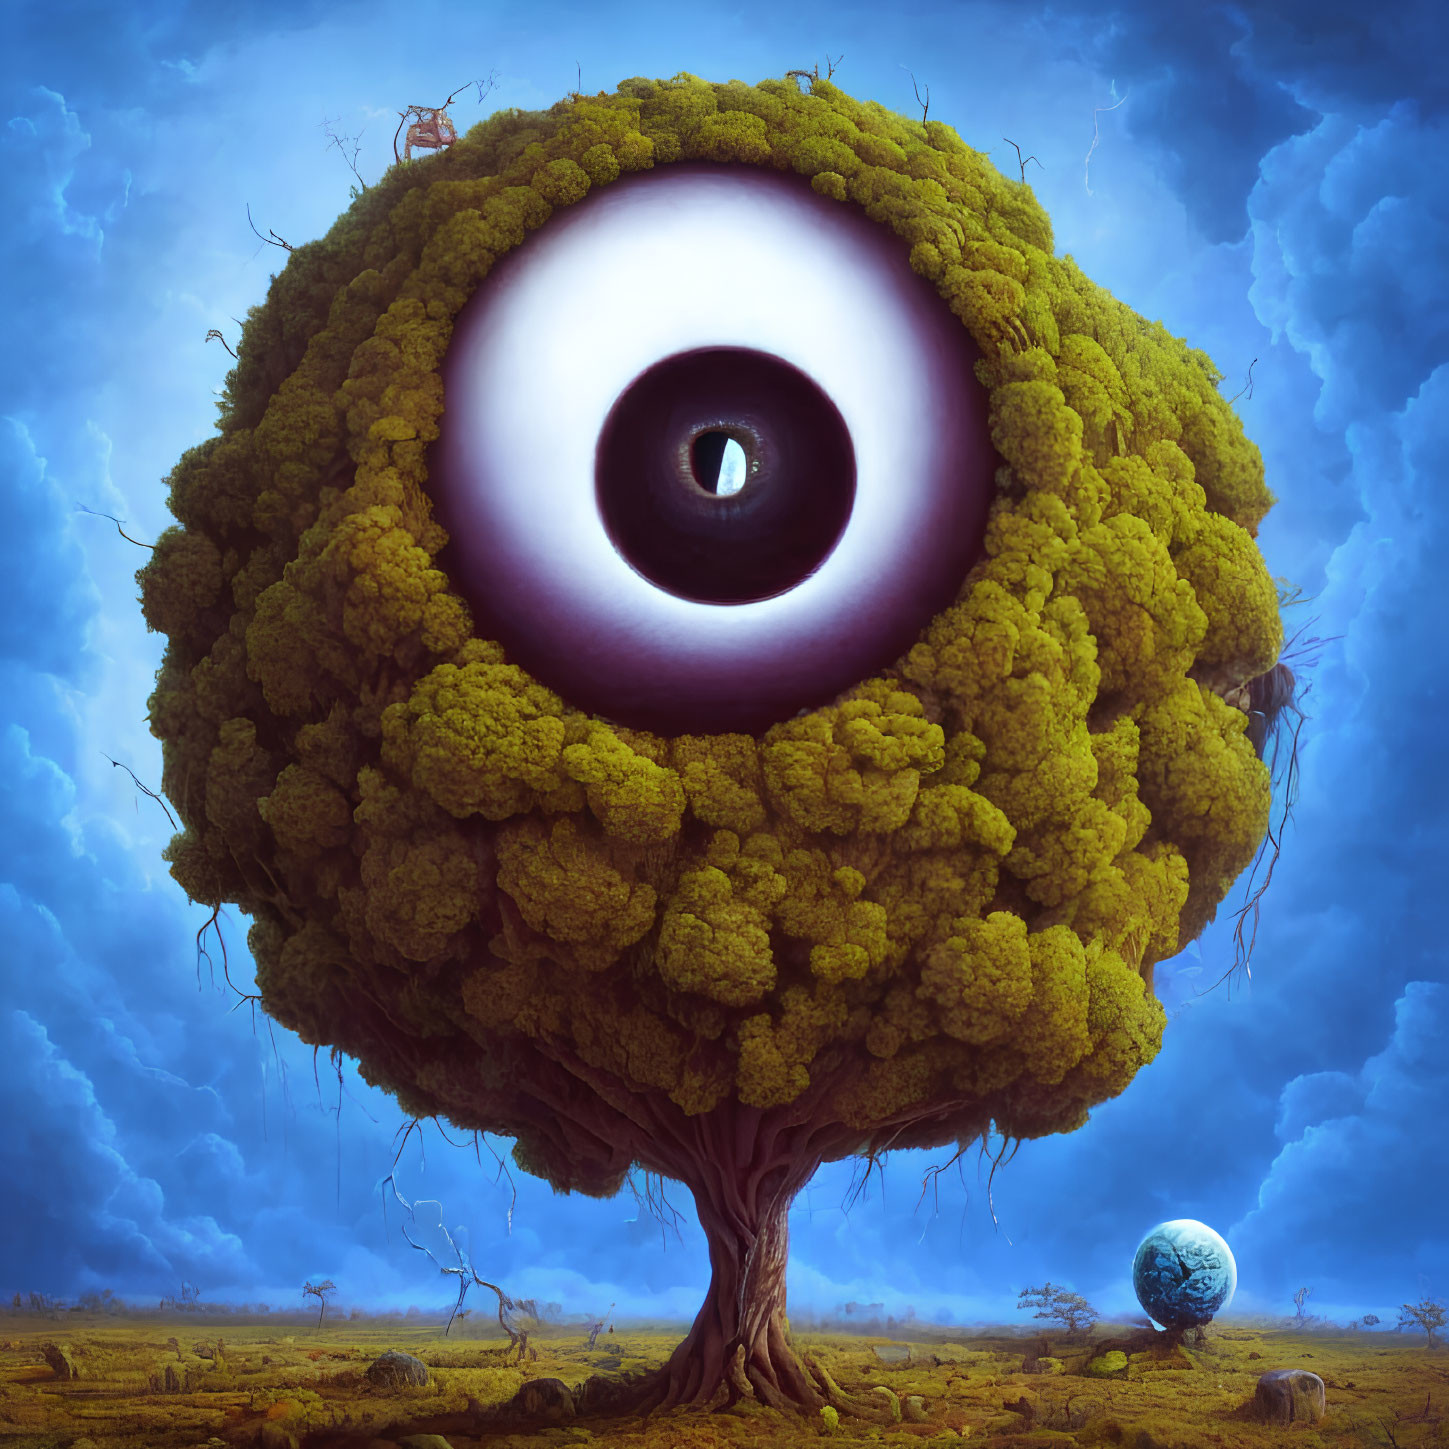 Surreal tree illustration with giant eye, person, and orb under blue sky